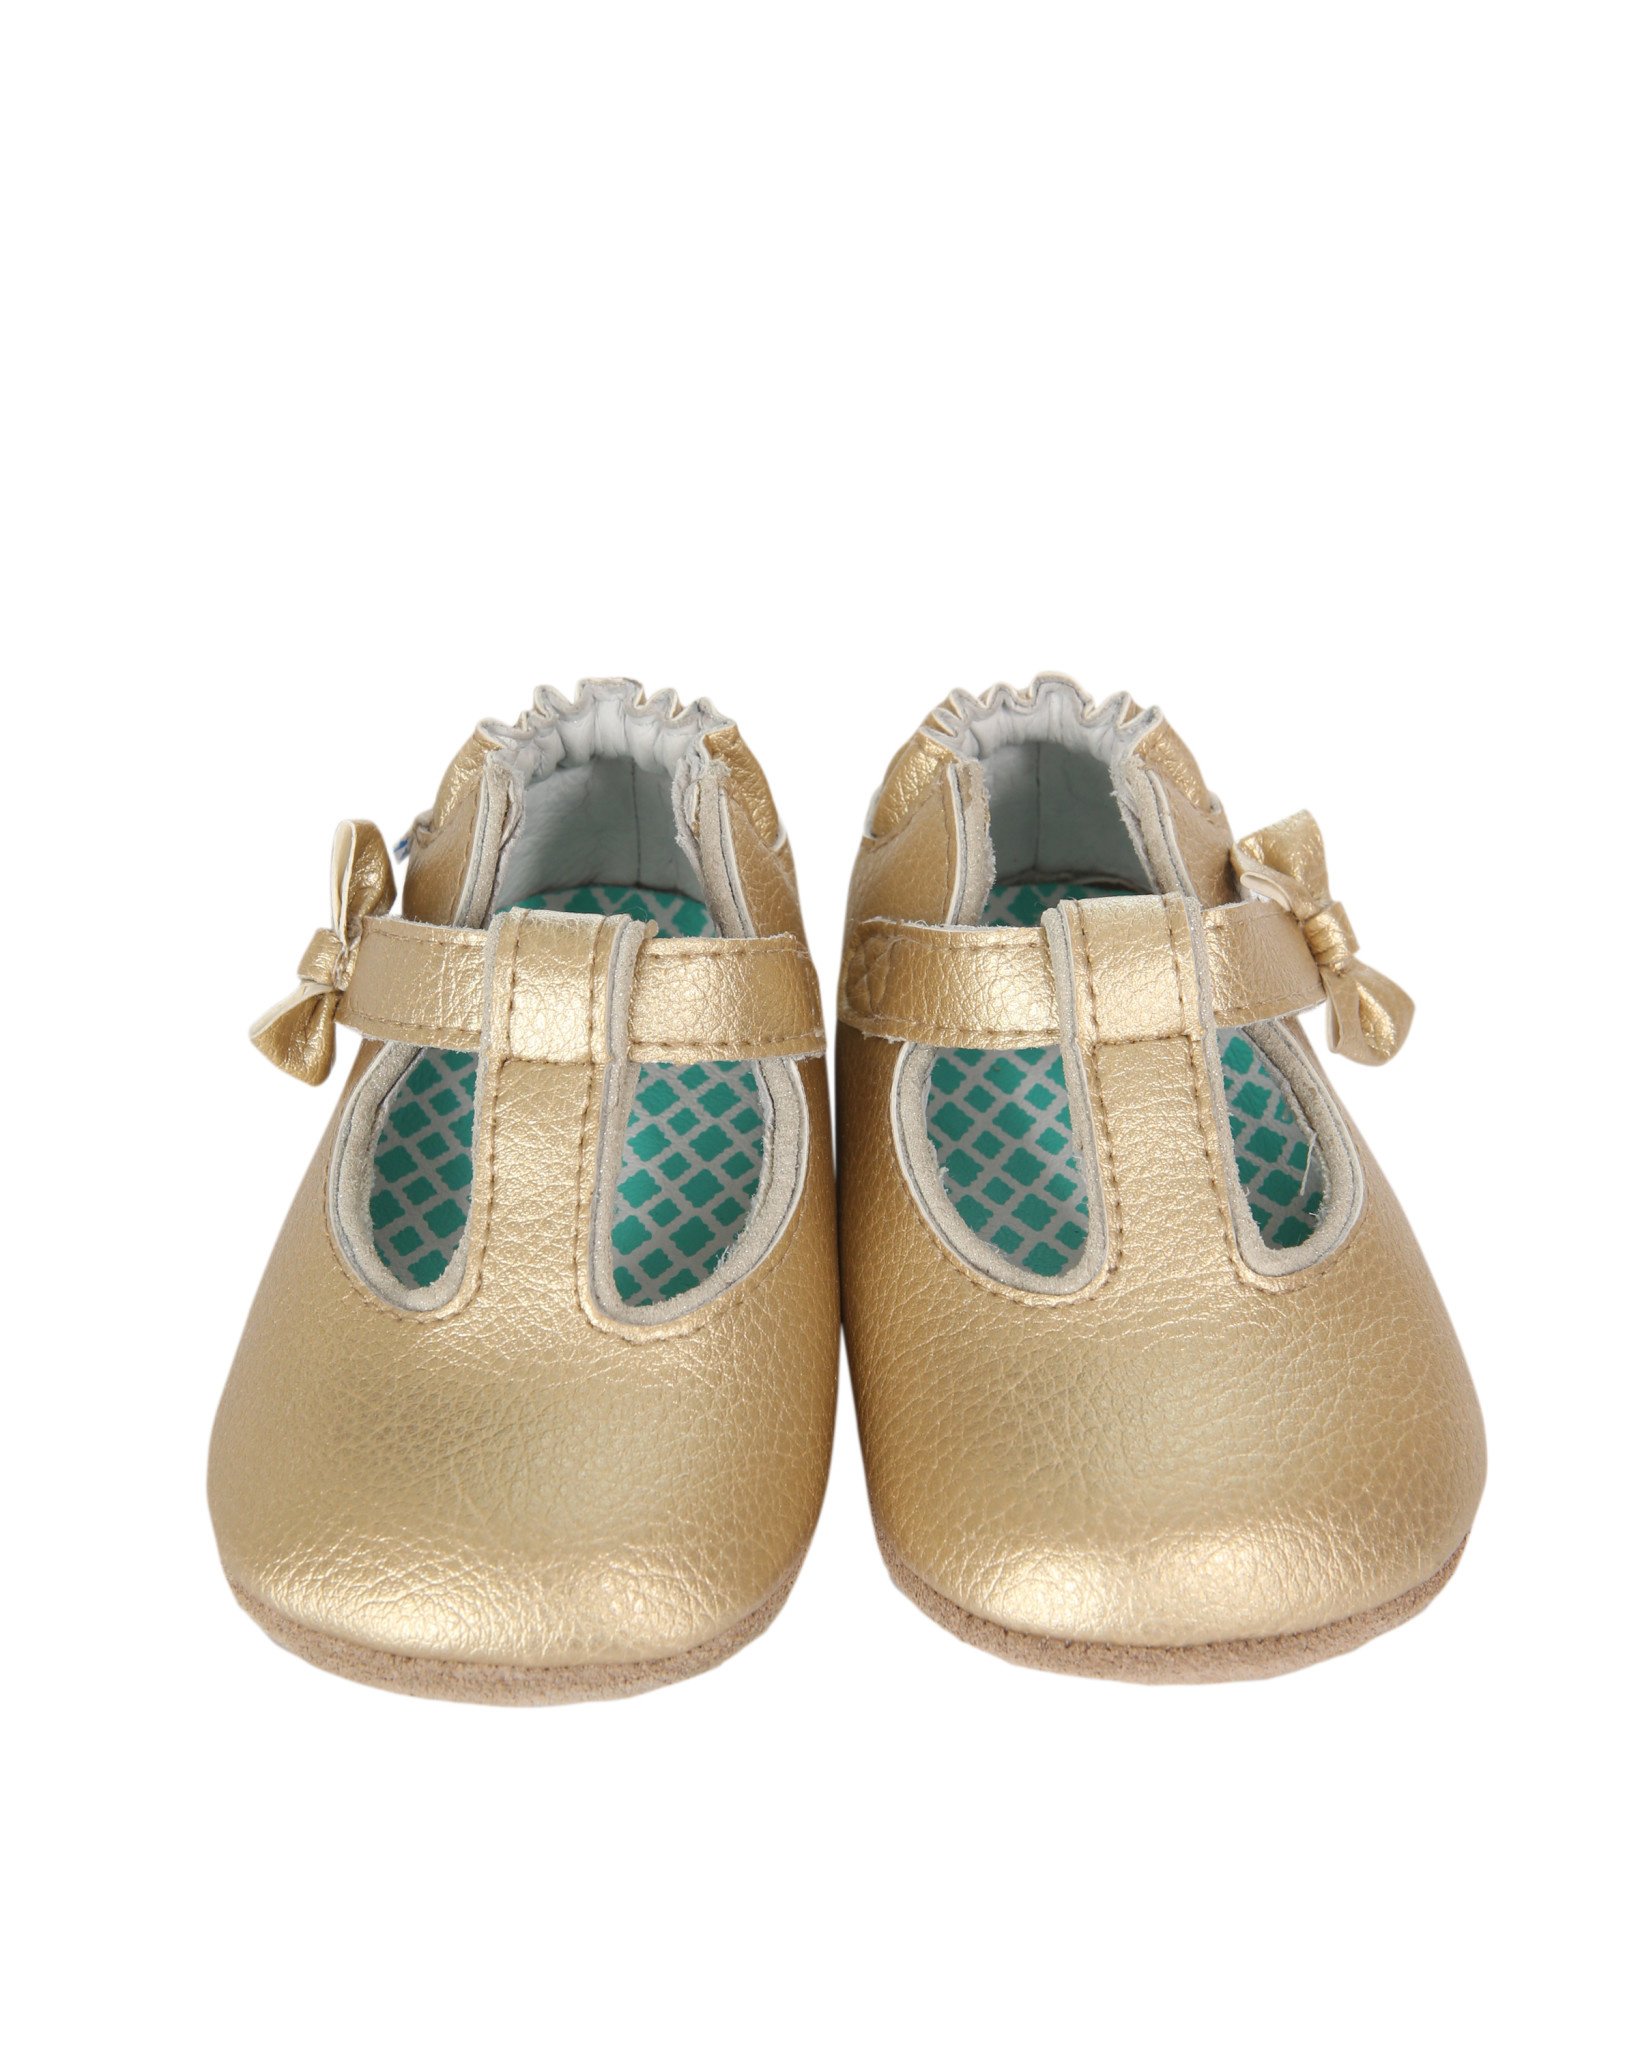 Leather or Appliques? These best Selling Soft Soled Shoes are a Must ...